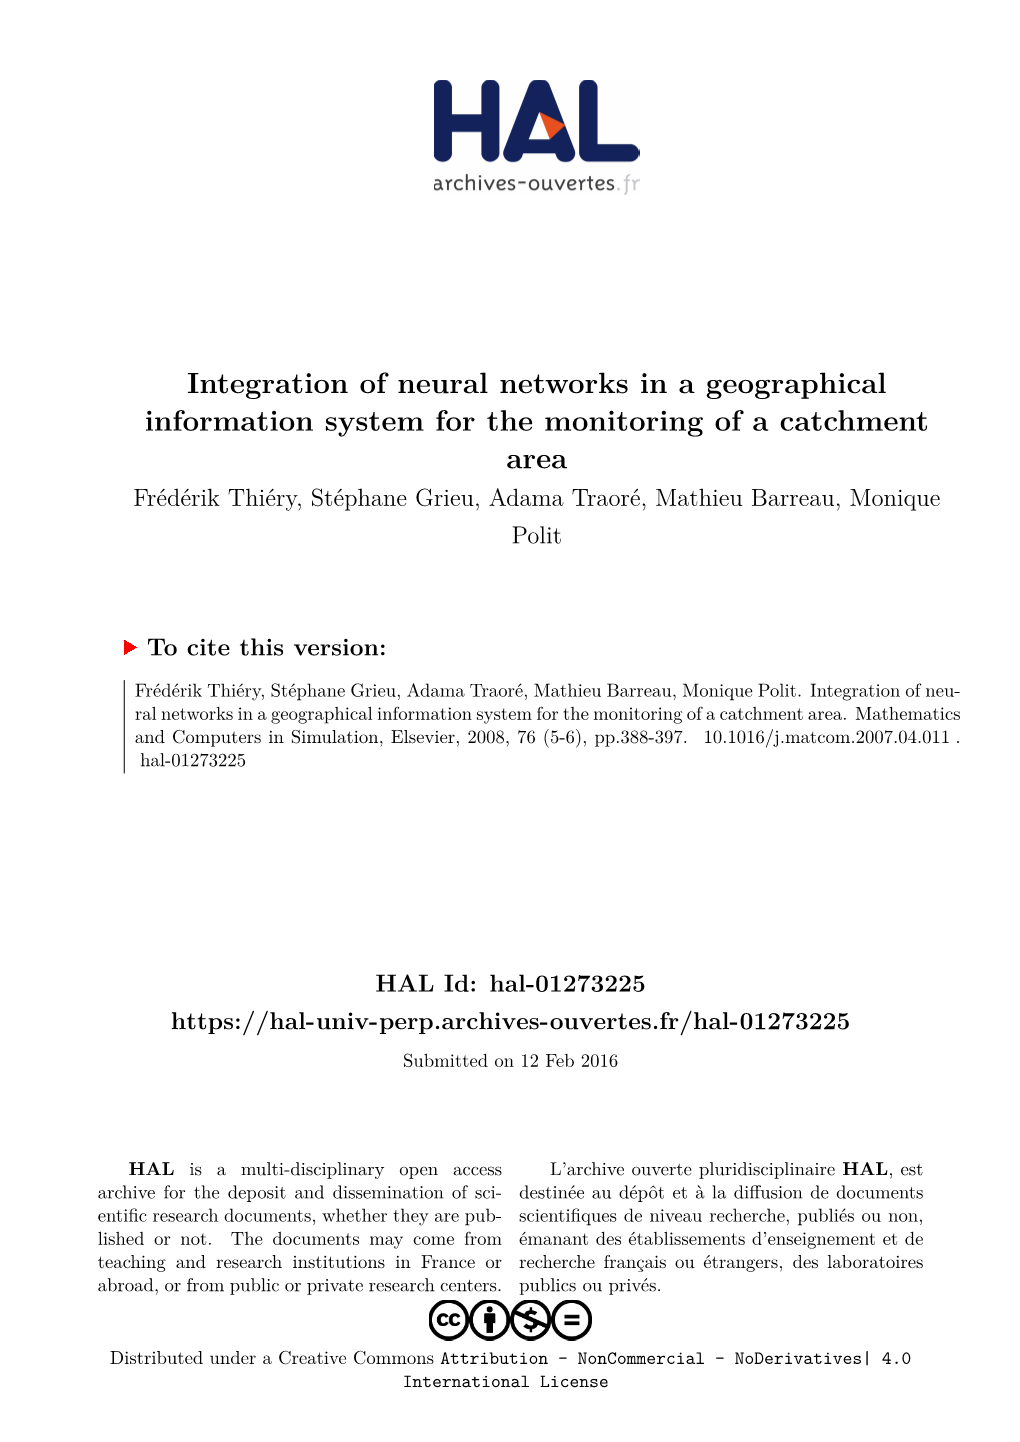 Integration of Neural Networks in a Geographical Information System For